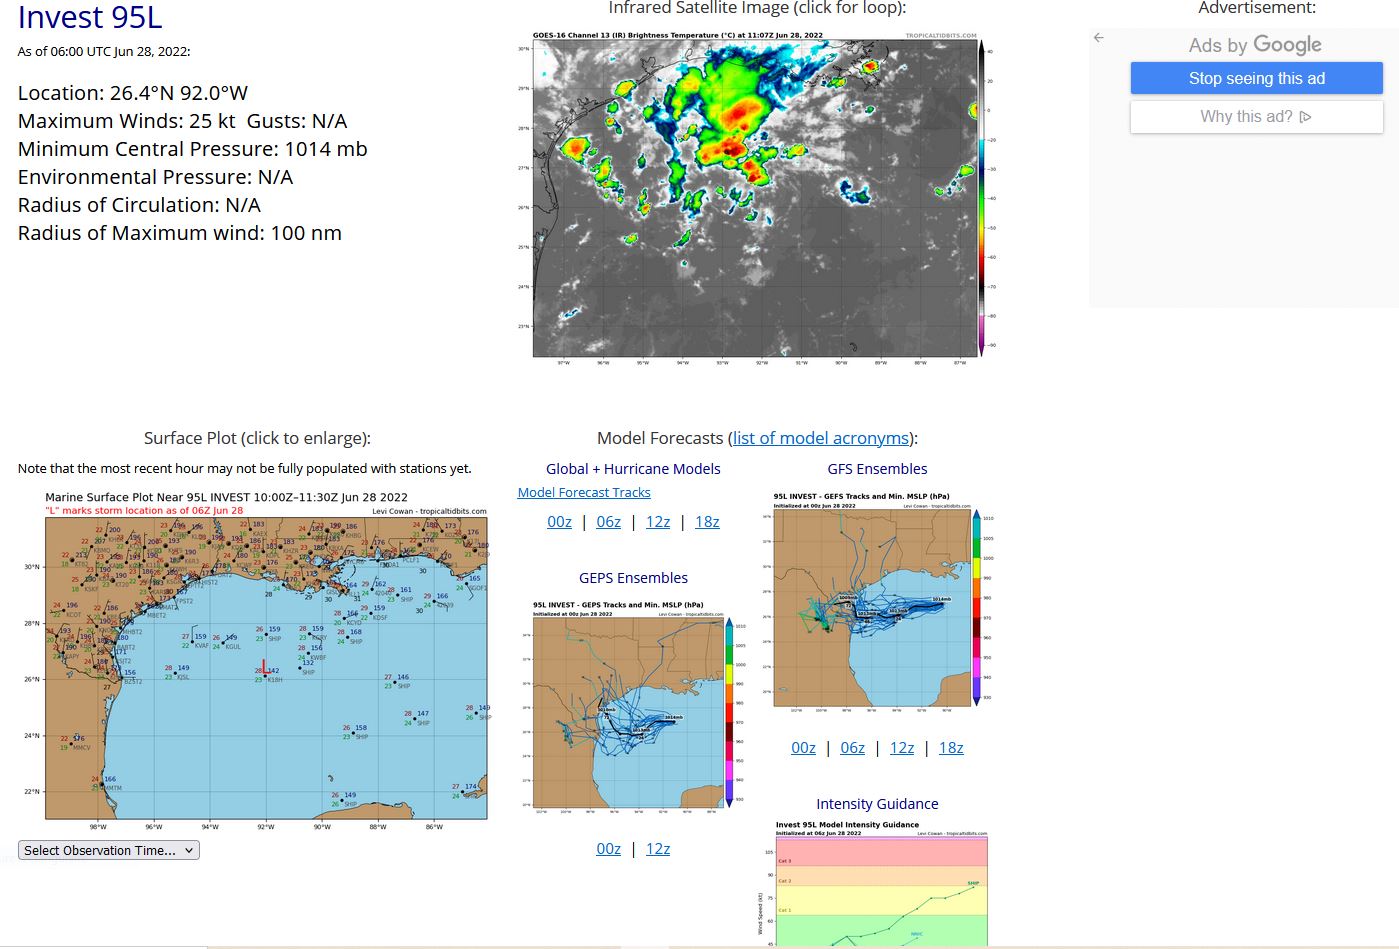 ZCZC MIATWOAT ALL TTAA00 KNHC DDHHMM  Tropical Weather Outlook NWS National Hurricane Center Miami FL 800 AM EDT Tue Jun 28 2022  For the North Atlantic...Caribbean Sea and the Gulf of Mexico:  East of the Windward Islands: The National Hurricane Center is issuing advisories on Potential  Tropical Cyclone Two, located a few hundred miles east of the  southern Windward Islands. * Formation chance through 48 hours...high...70 percent. * Formation chance through 5 days...high...90 percent.  1. Northern Gulf of Mexico: An area of low pressure is centered over the northwestern Gulf of  Mexico. Shower and thunderstorm activity associated with the low has  increased overnight but remains disorganized. Some additional  development of this system is possible as it moves slowly westward  or west-southwestward and approaches the coast of Texas during the  next two days. Regardless of development, heavy rain will be  possible along portions of the Texas coast later this week. For more  information about the potential for heavy rain, please see products  issued by your National Weather Service office. * Formation chance through 48 hours...low...30 percent. * Formation chance through 5 days...low...30 percent.